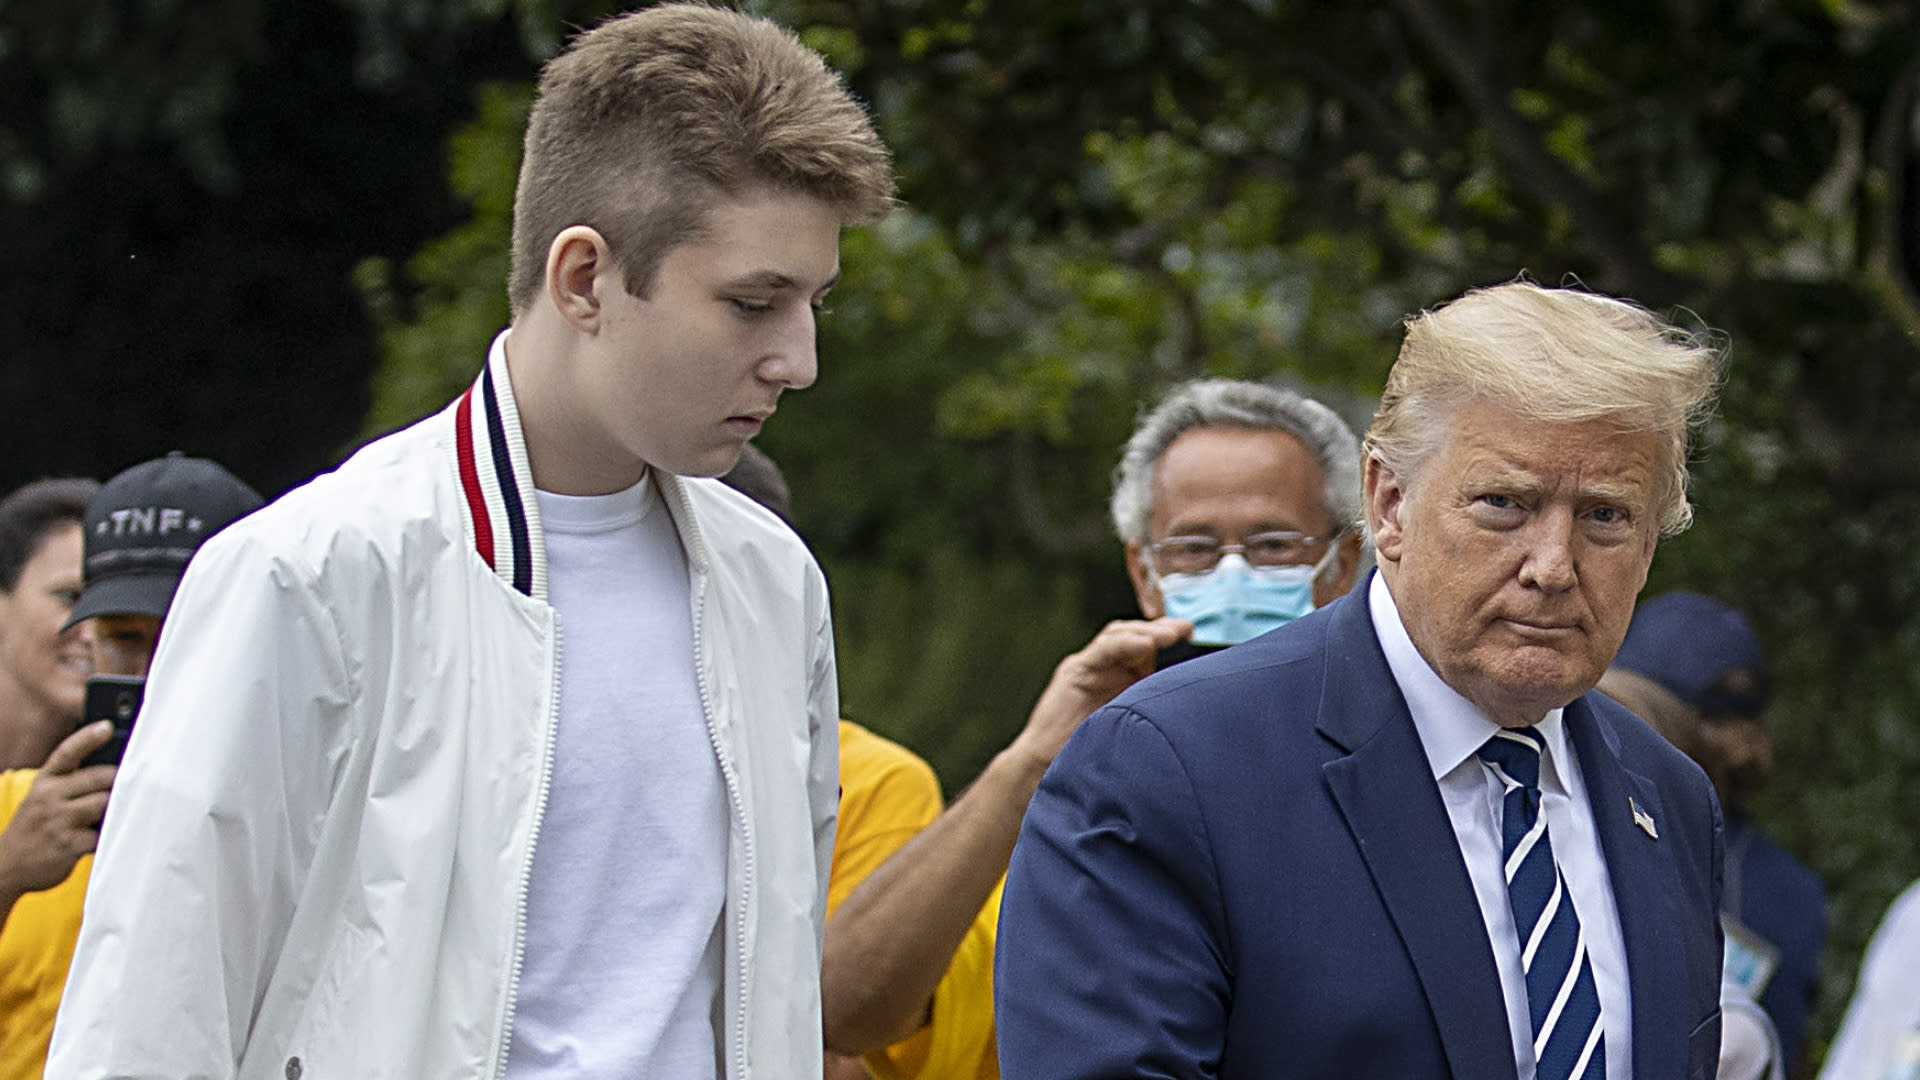 Barron Trump Looks Grown Up Towering Over Dad President Trump In Rare